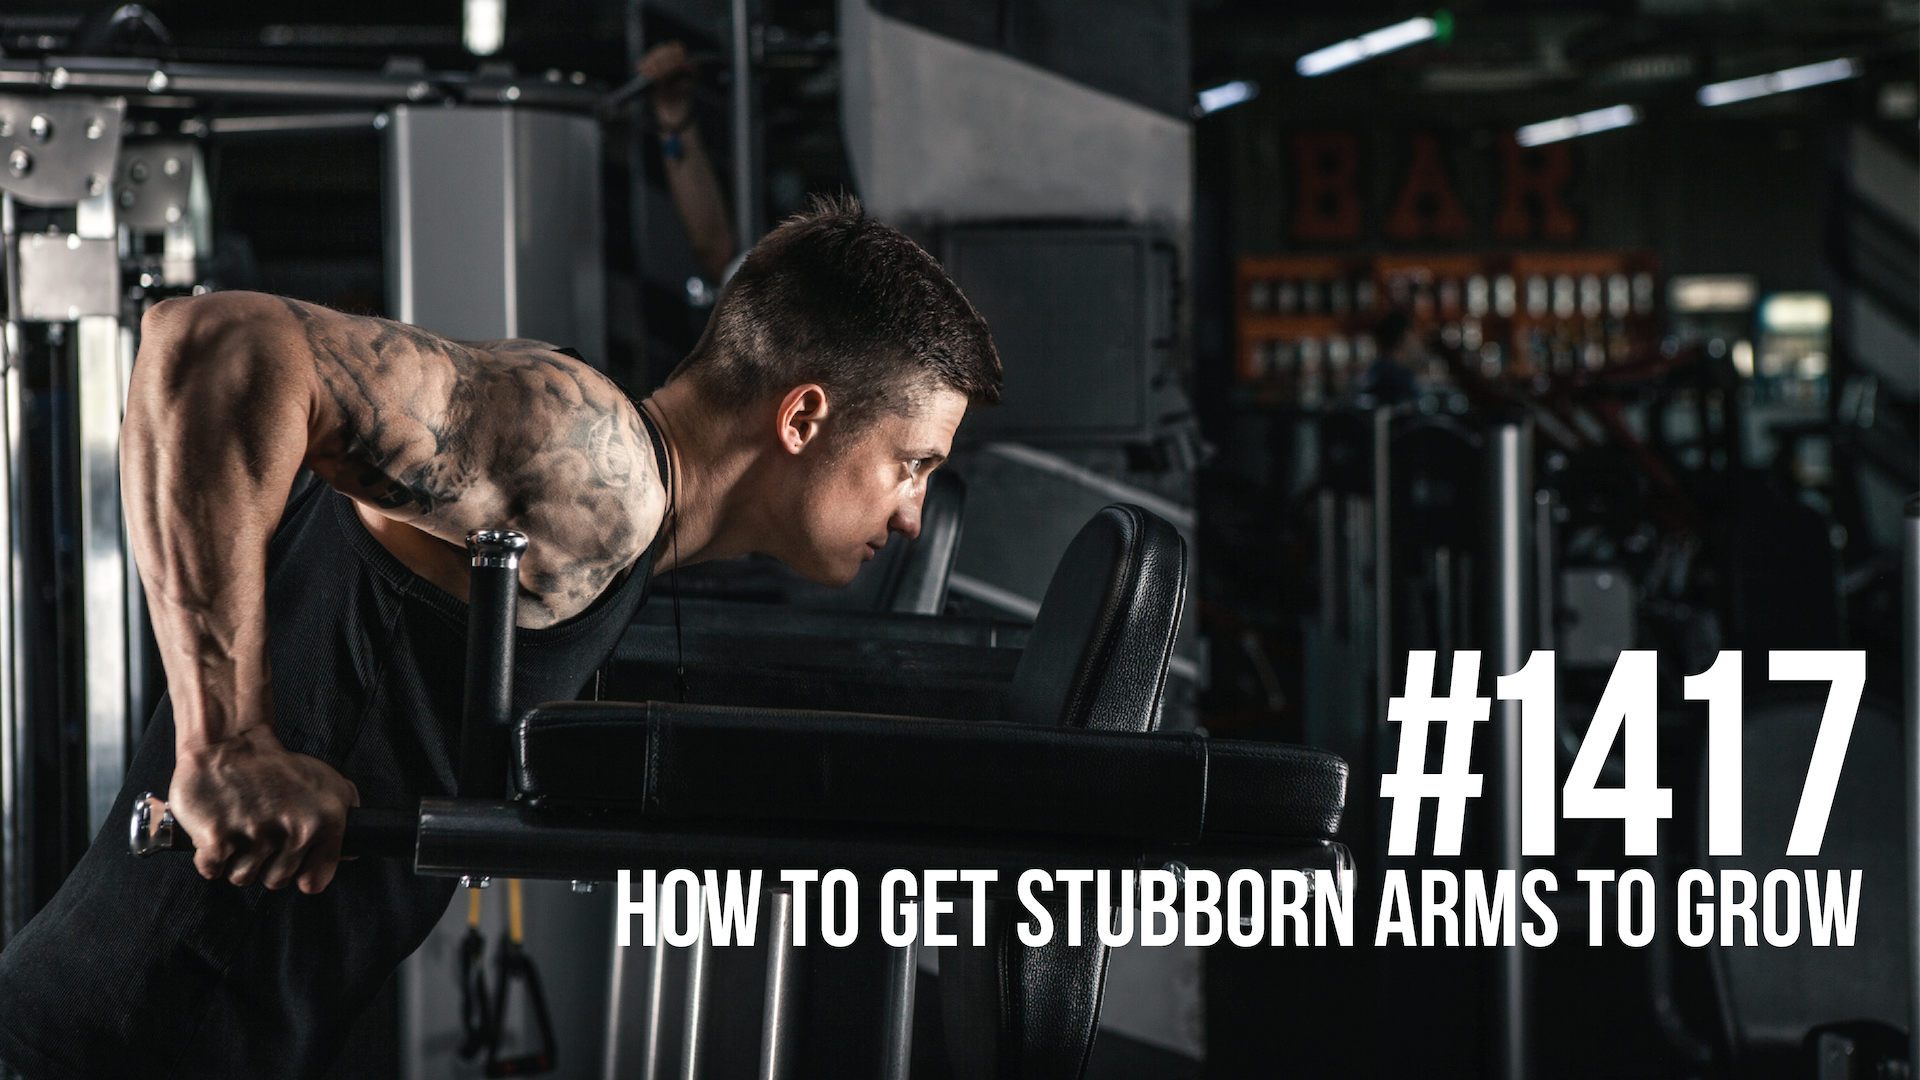 1417: How to Get Stubborn Arms to Grow